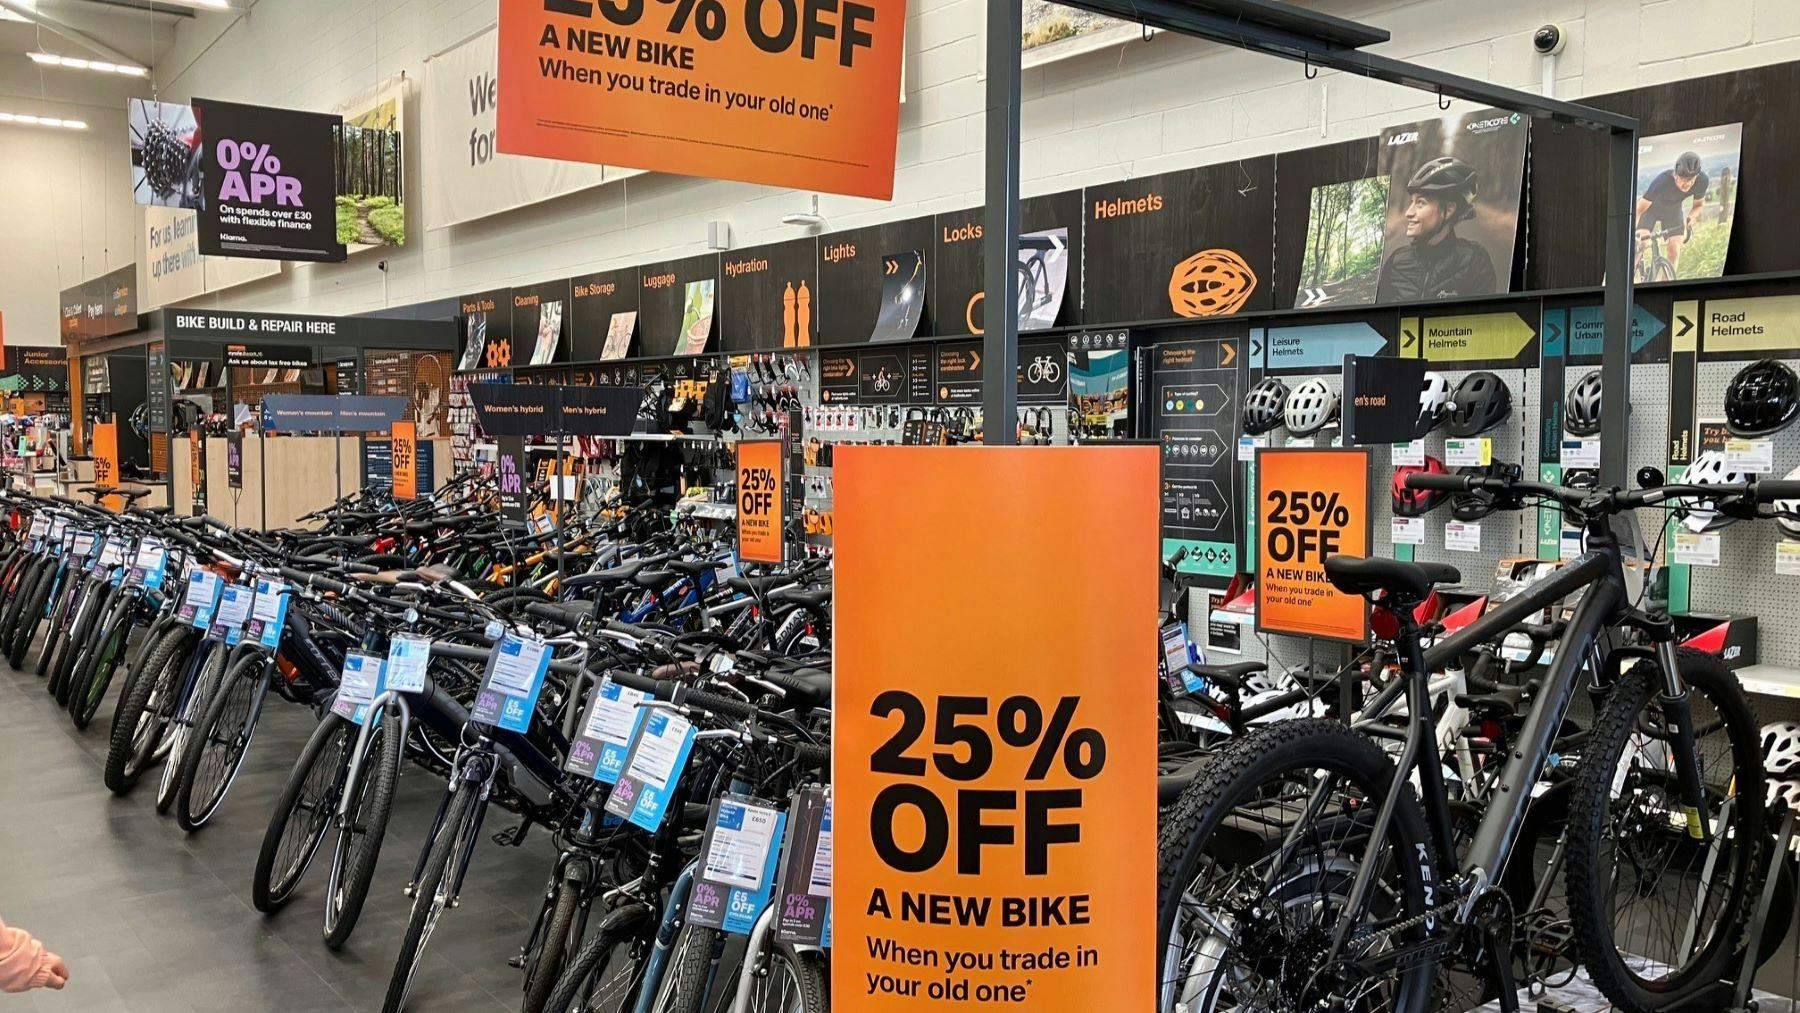 “Promotional participation increased by 33% year-on-year in H2, and more customers are purchasing on credit, leading to significant pressure on gross margins,” Halfords states in its financial statement. - Photo Bike Europe